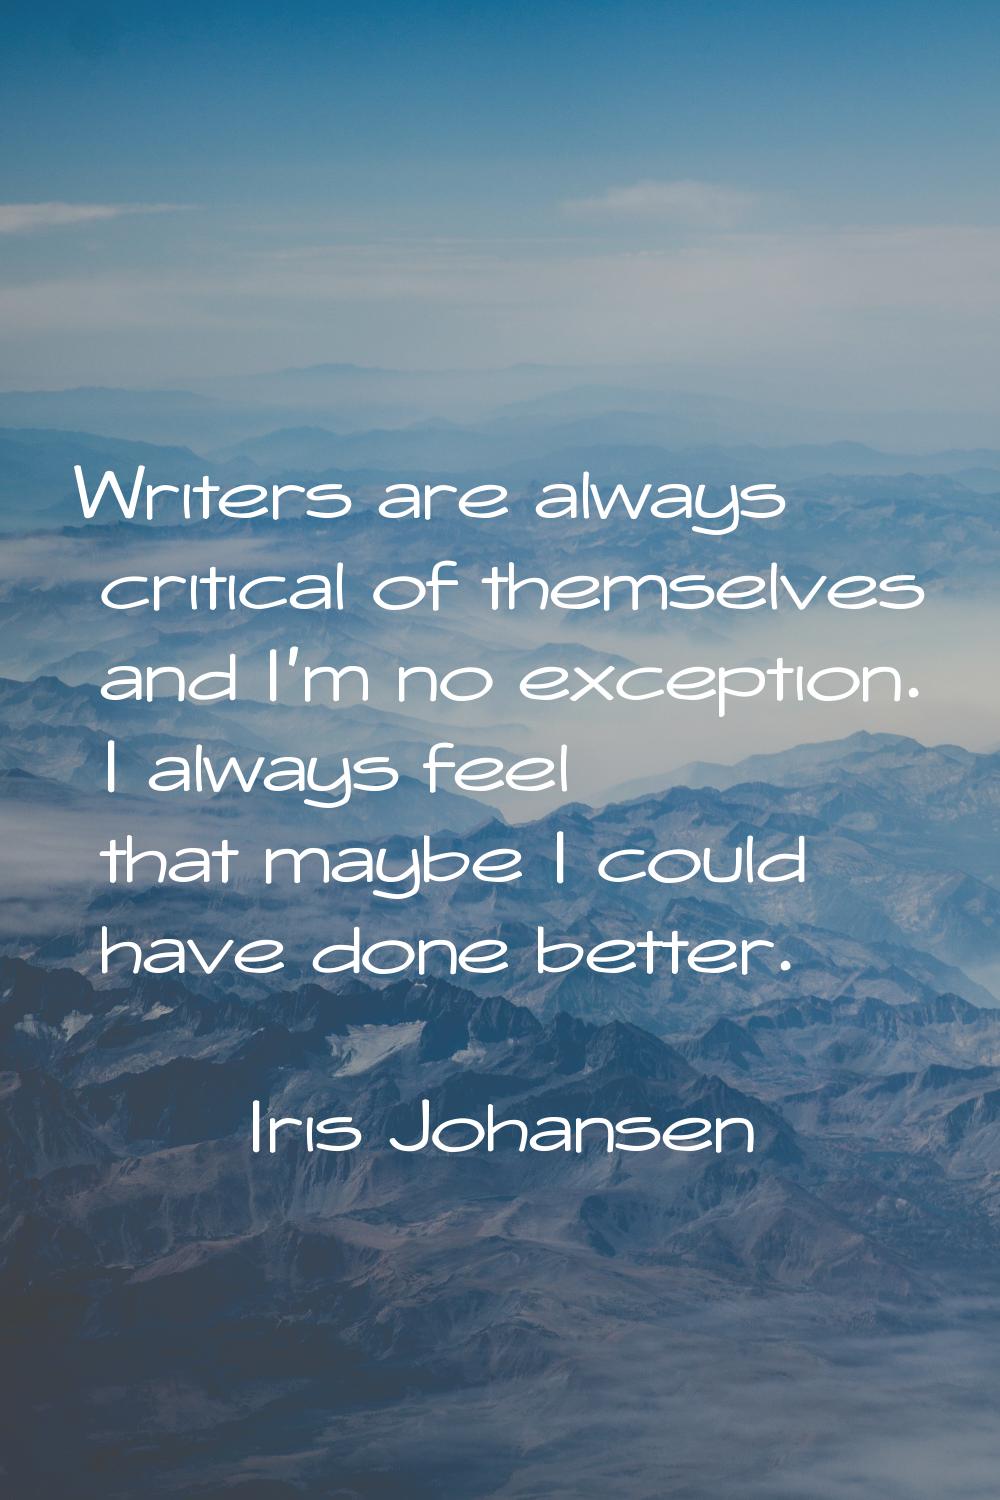 Writers are always critical of themselves and I'm no exception. I always feel that maybe I could ha